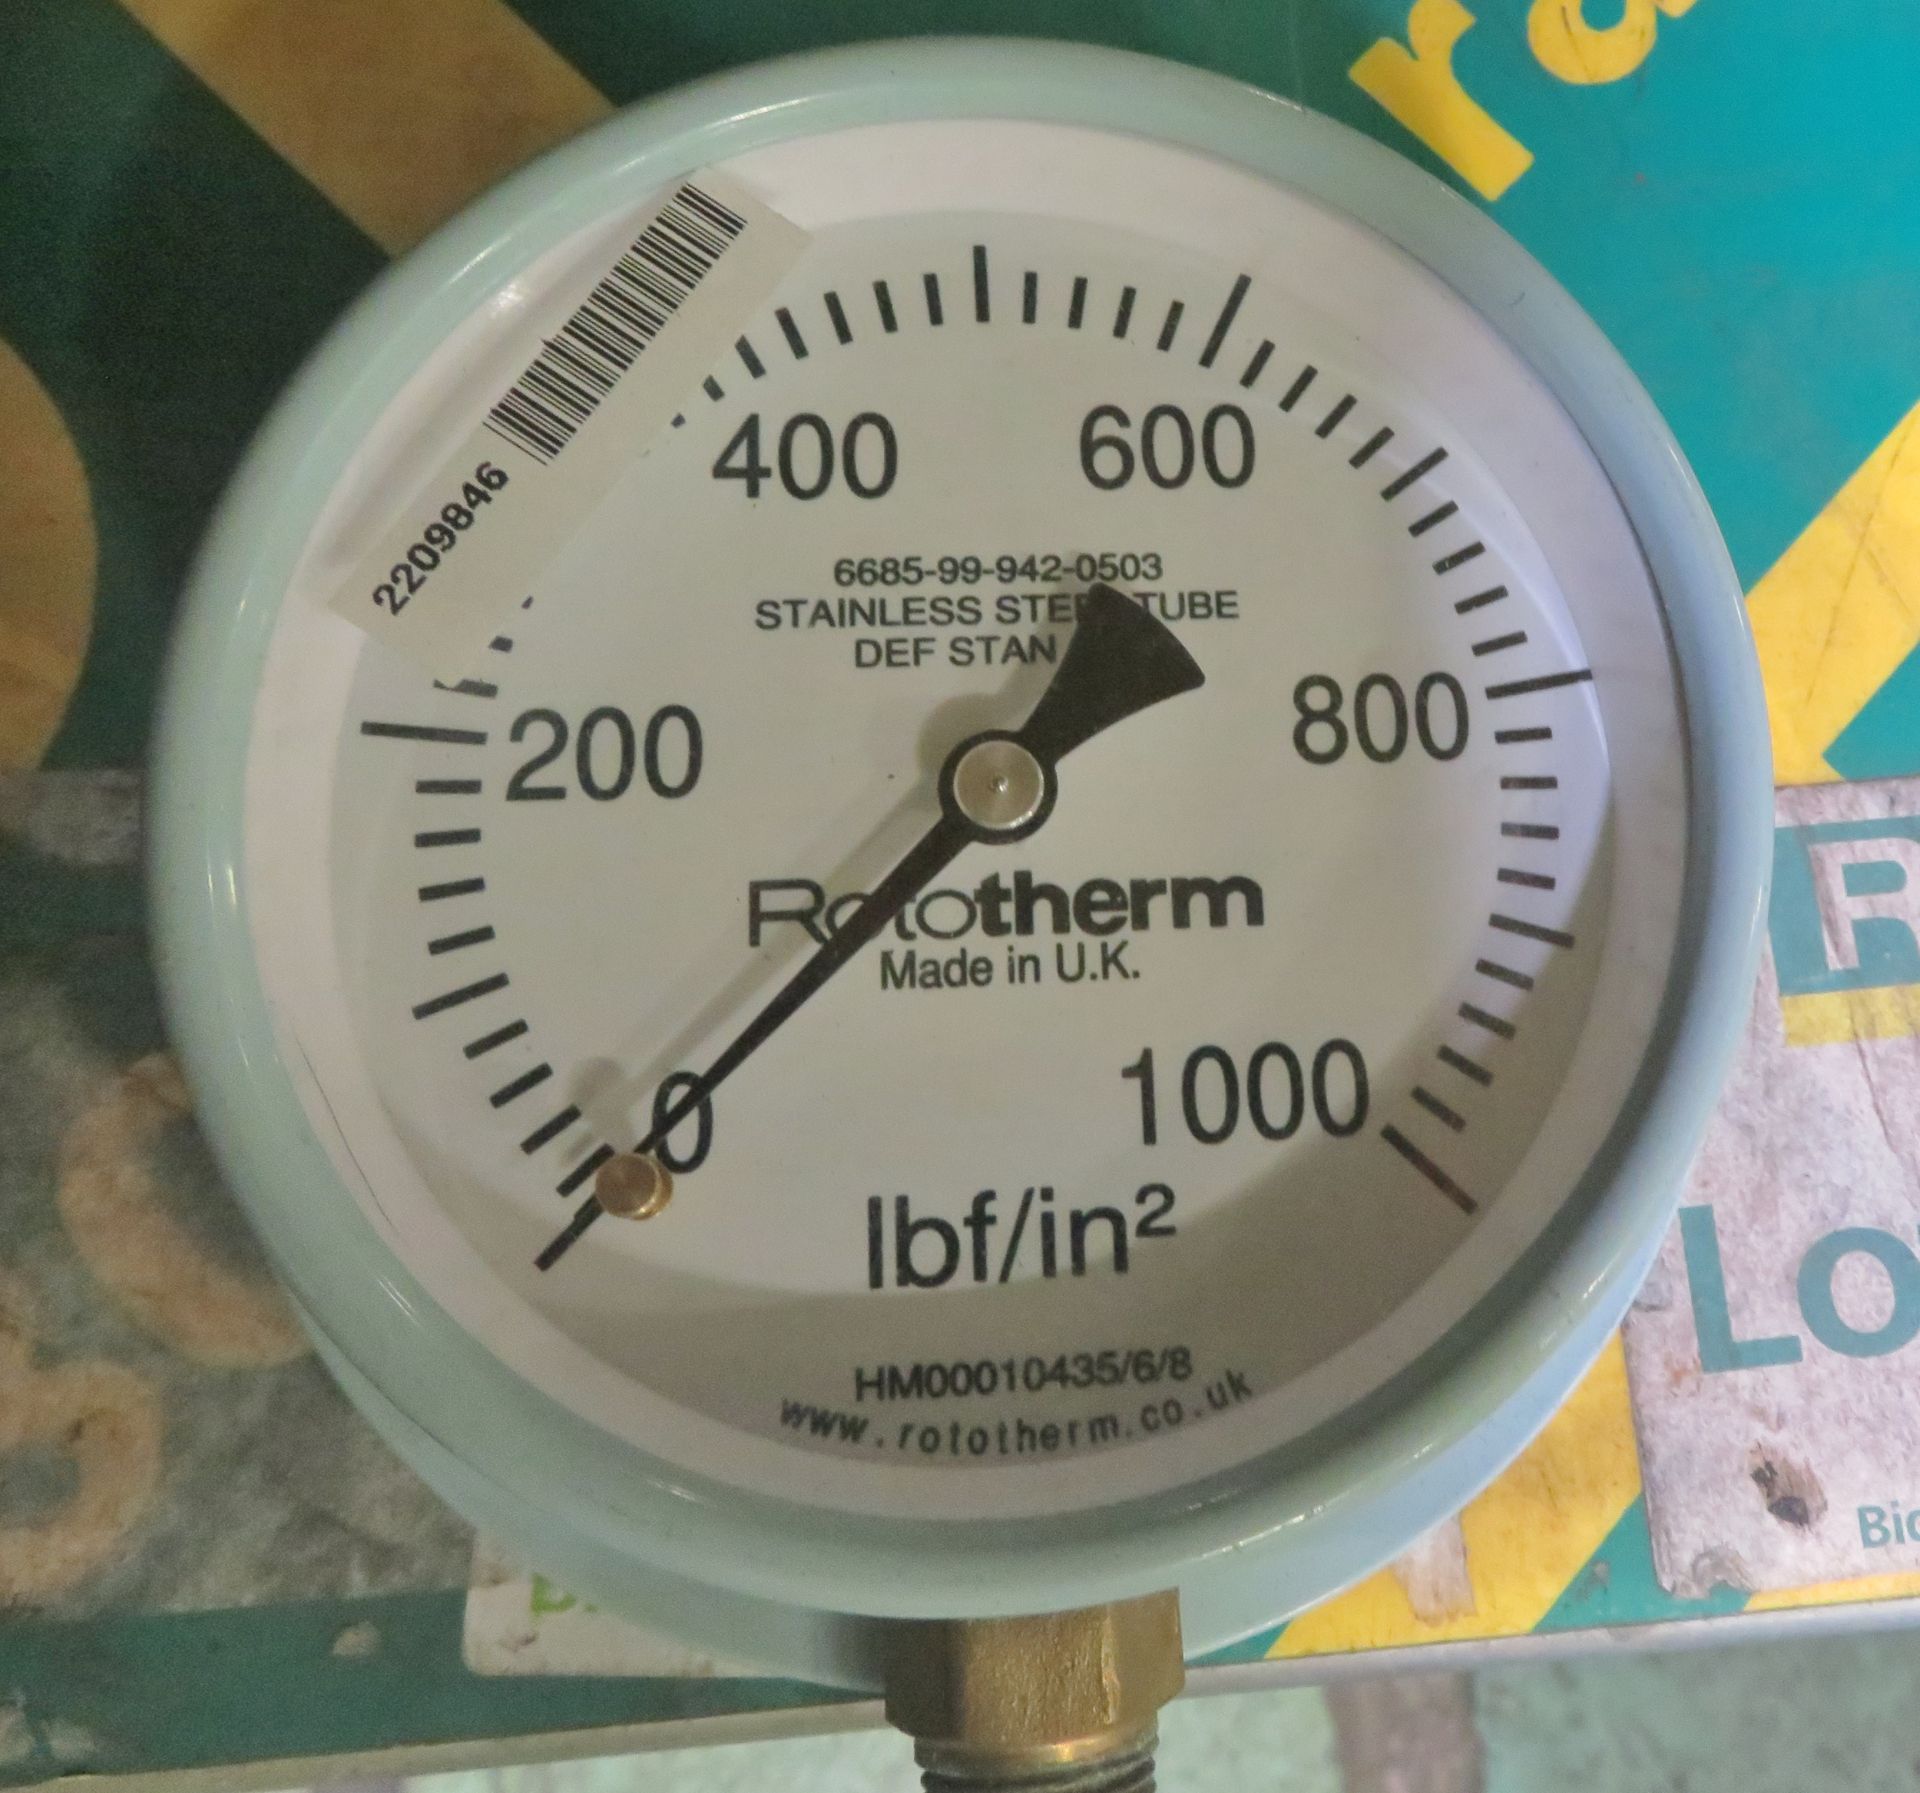 2x Rototherm LBF/IN2 Pressure Gauges - Image 2 of 3